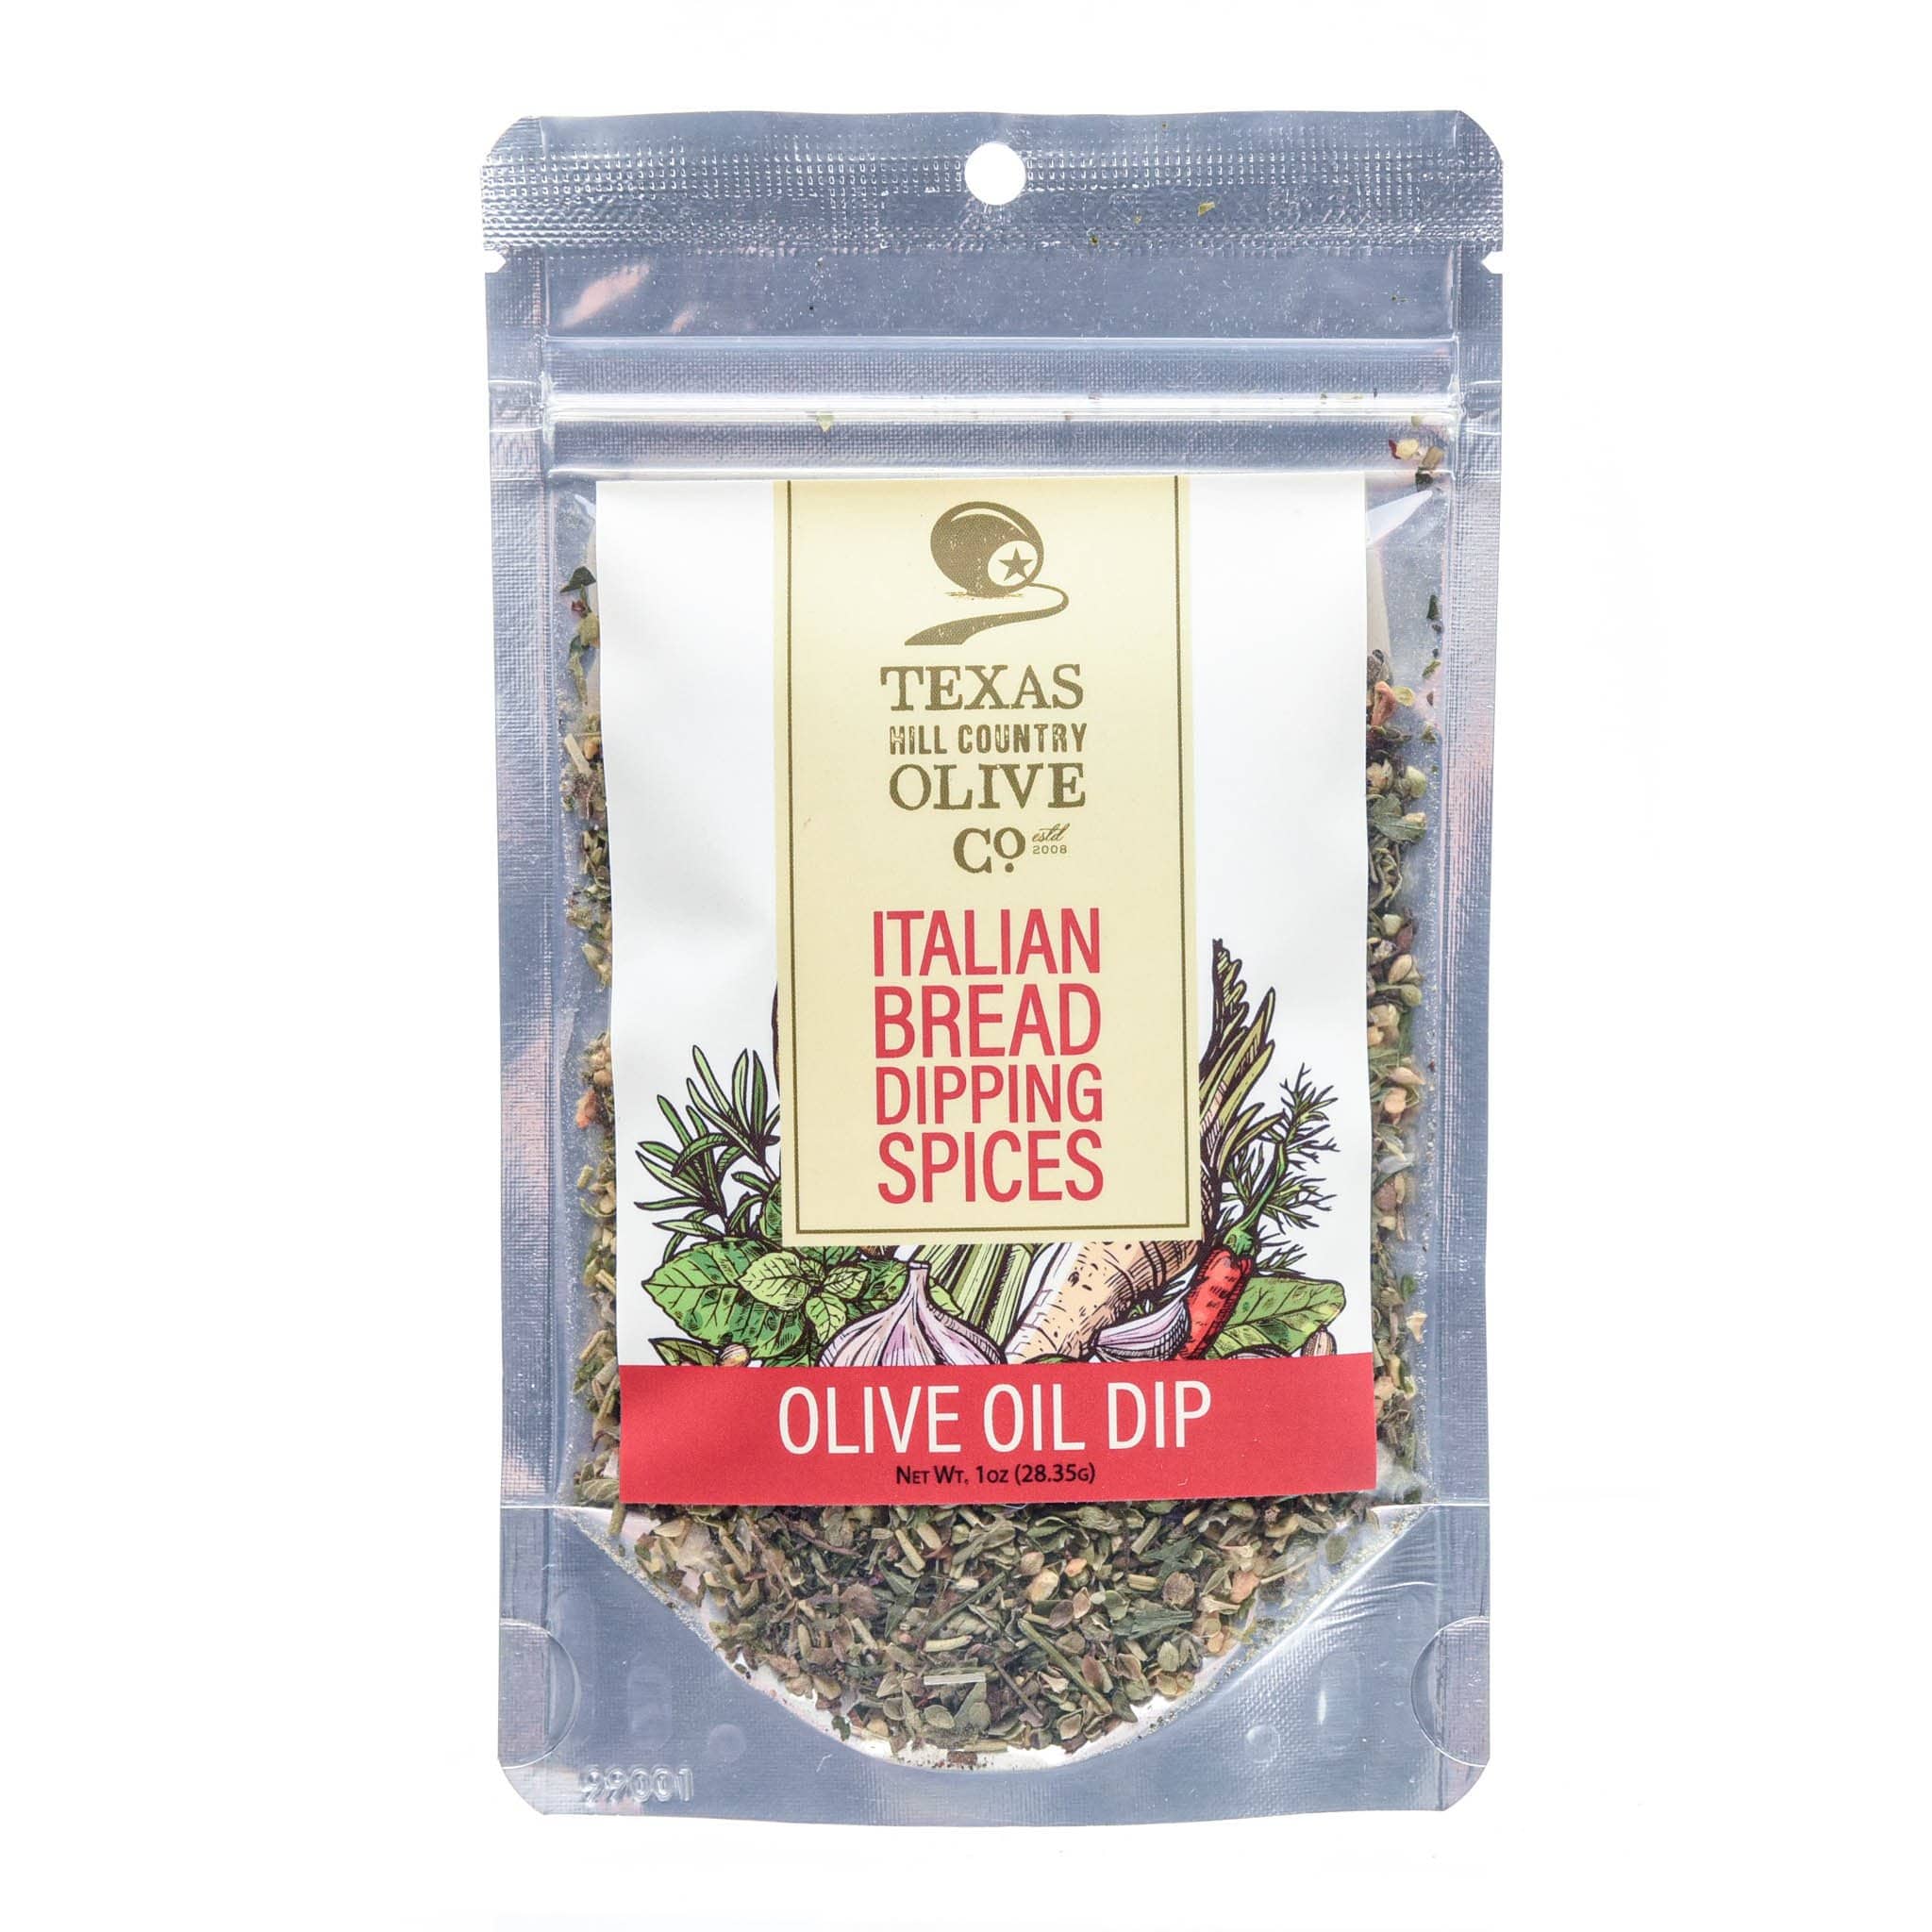 Texas Hill Country Olive Co. Italian Bread Dipping Spices